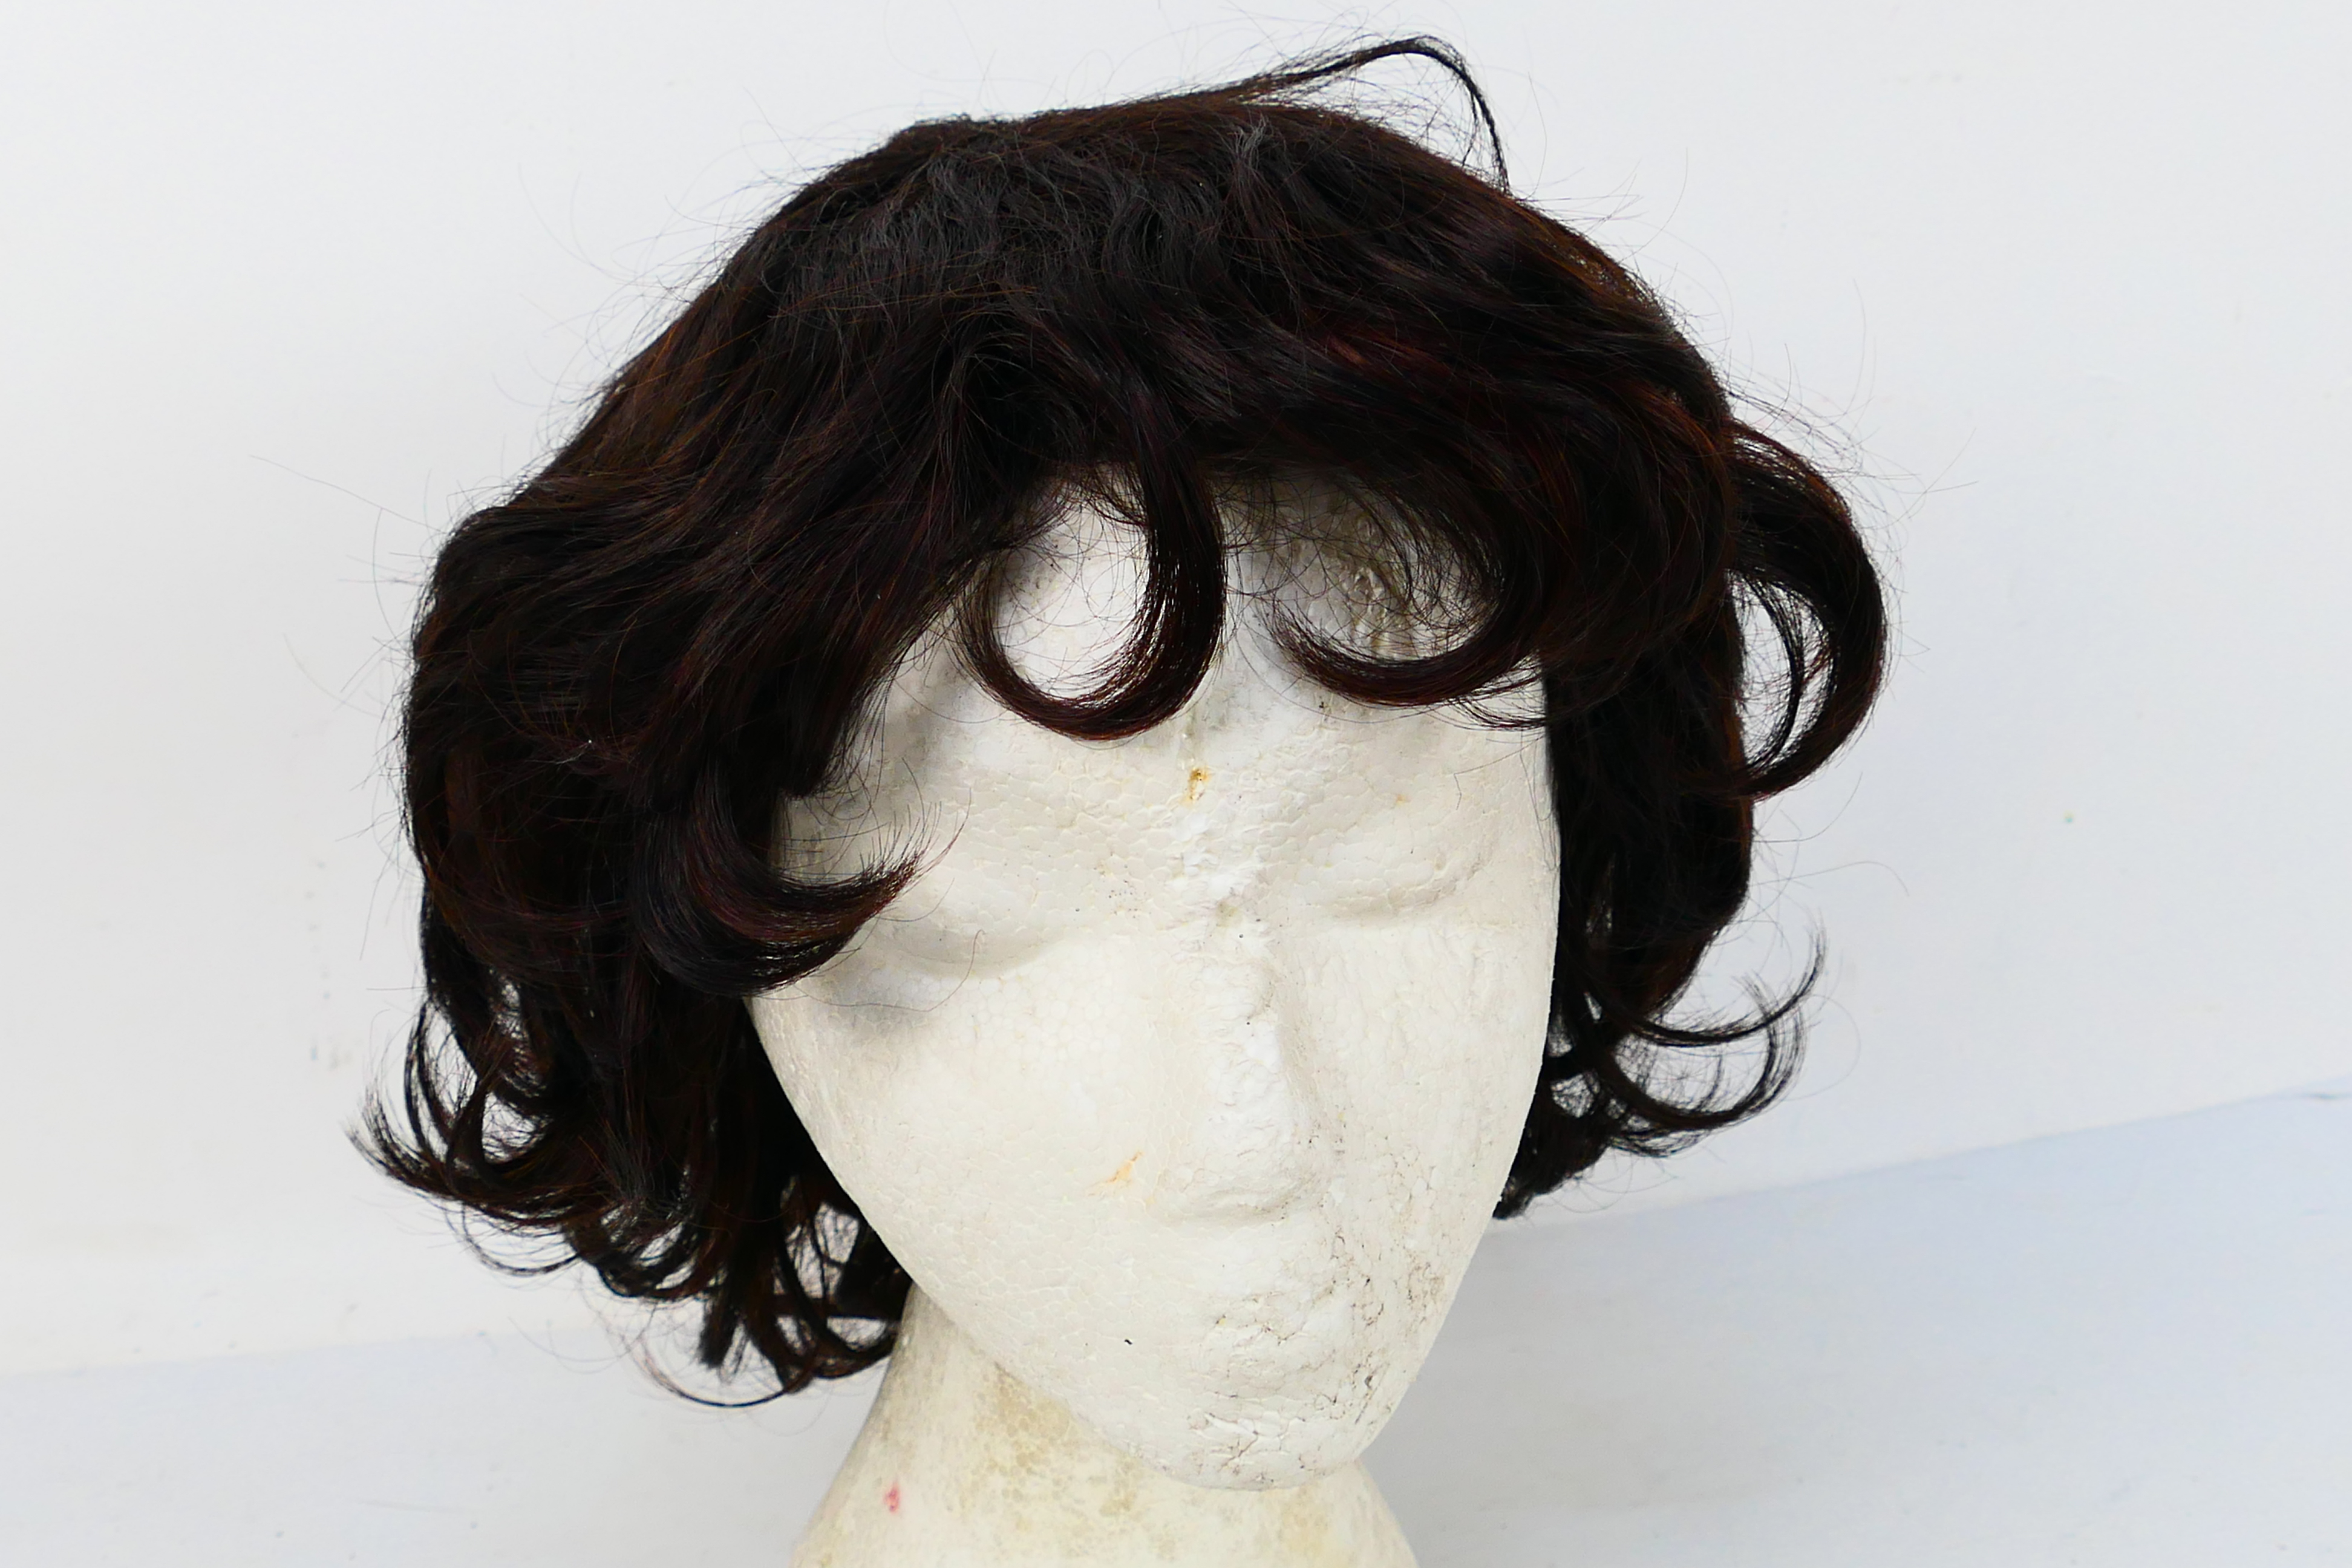 Wigs - A selection of Costume / Theatre wigs appearing in Good to Excellent condition. - Image 11 of 12